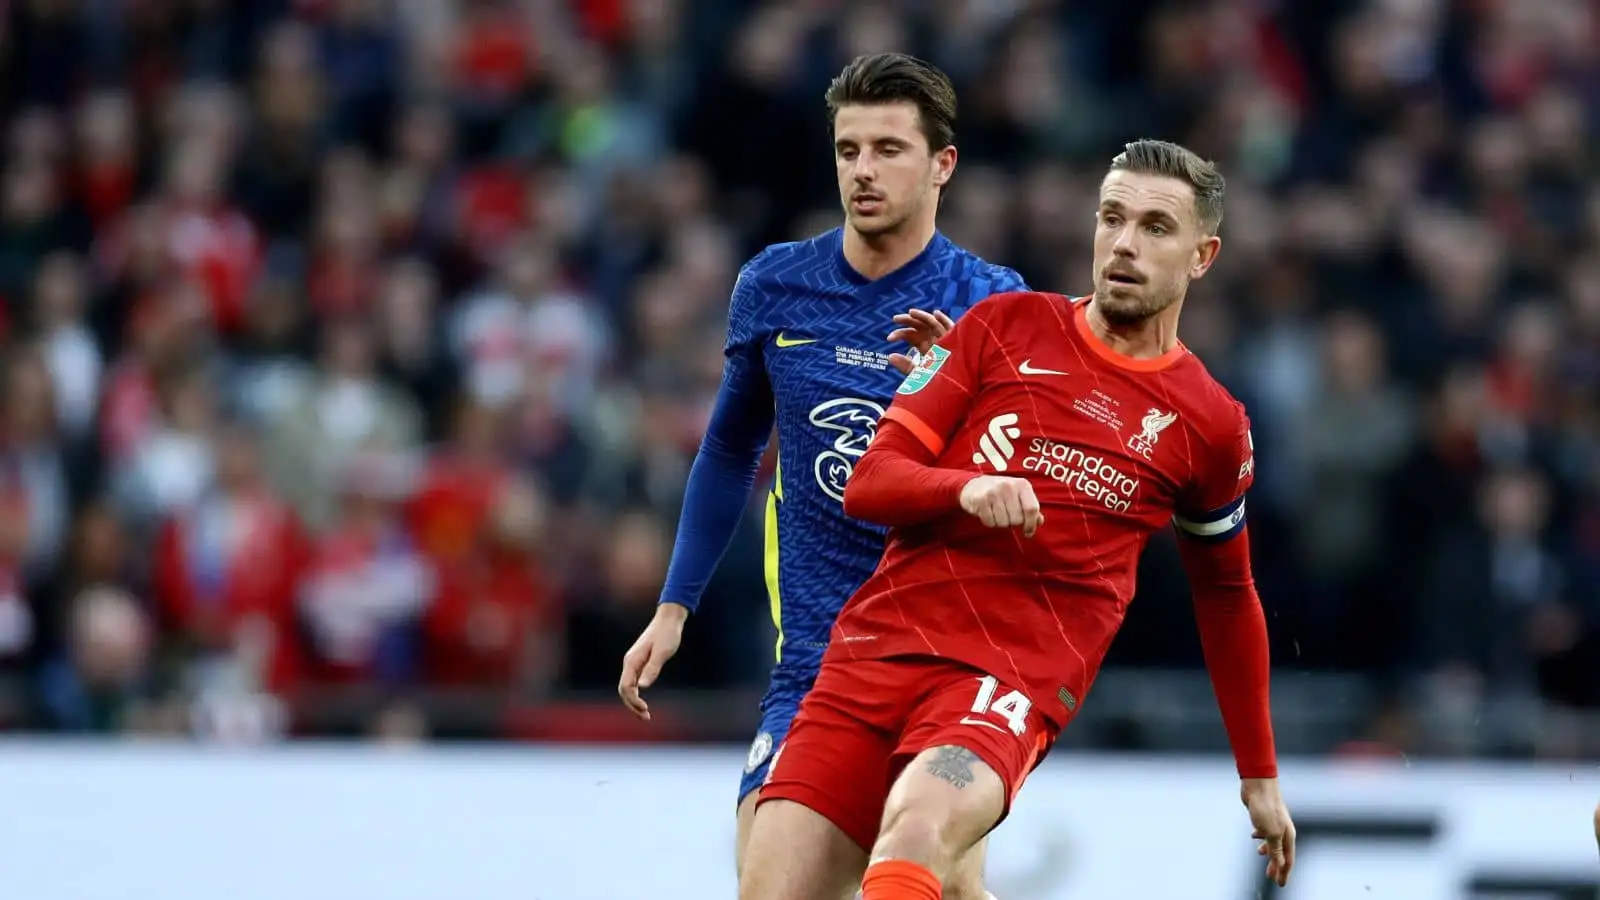 Liverpool captain Henderson hails ‘top player’ Mount after costly Chelsea FA Cup penalty miss